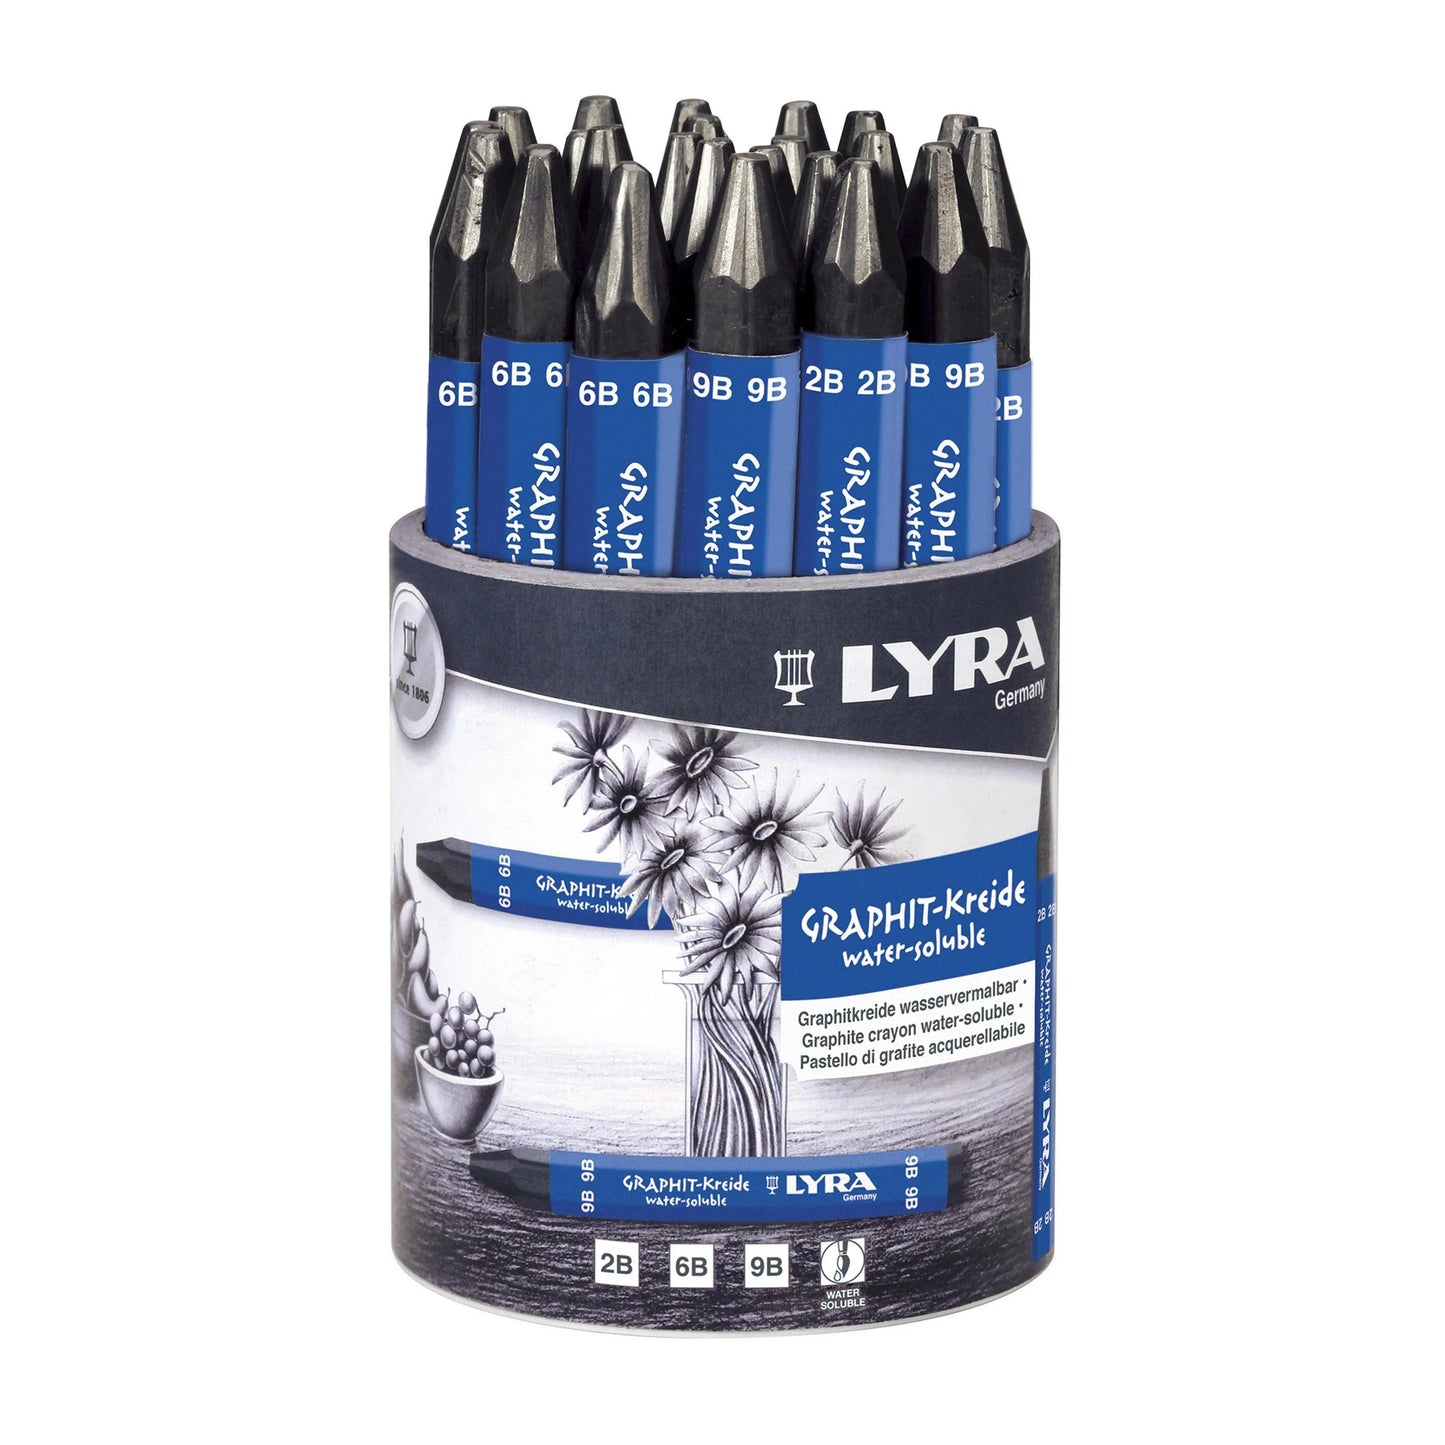 Lyra Watersoluble Graphite Crayons The Stationers